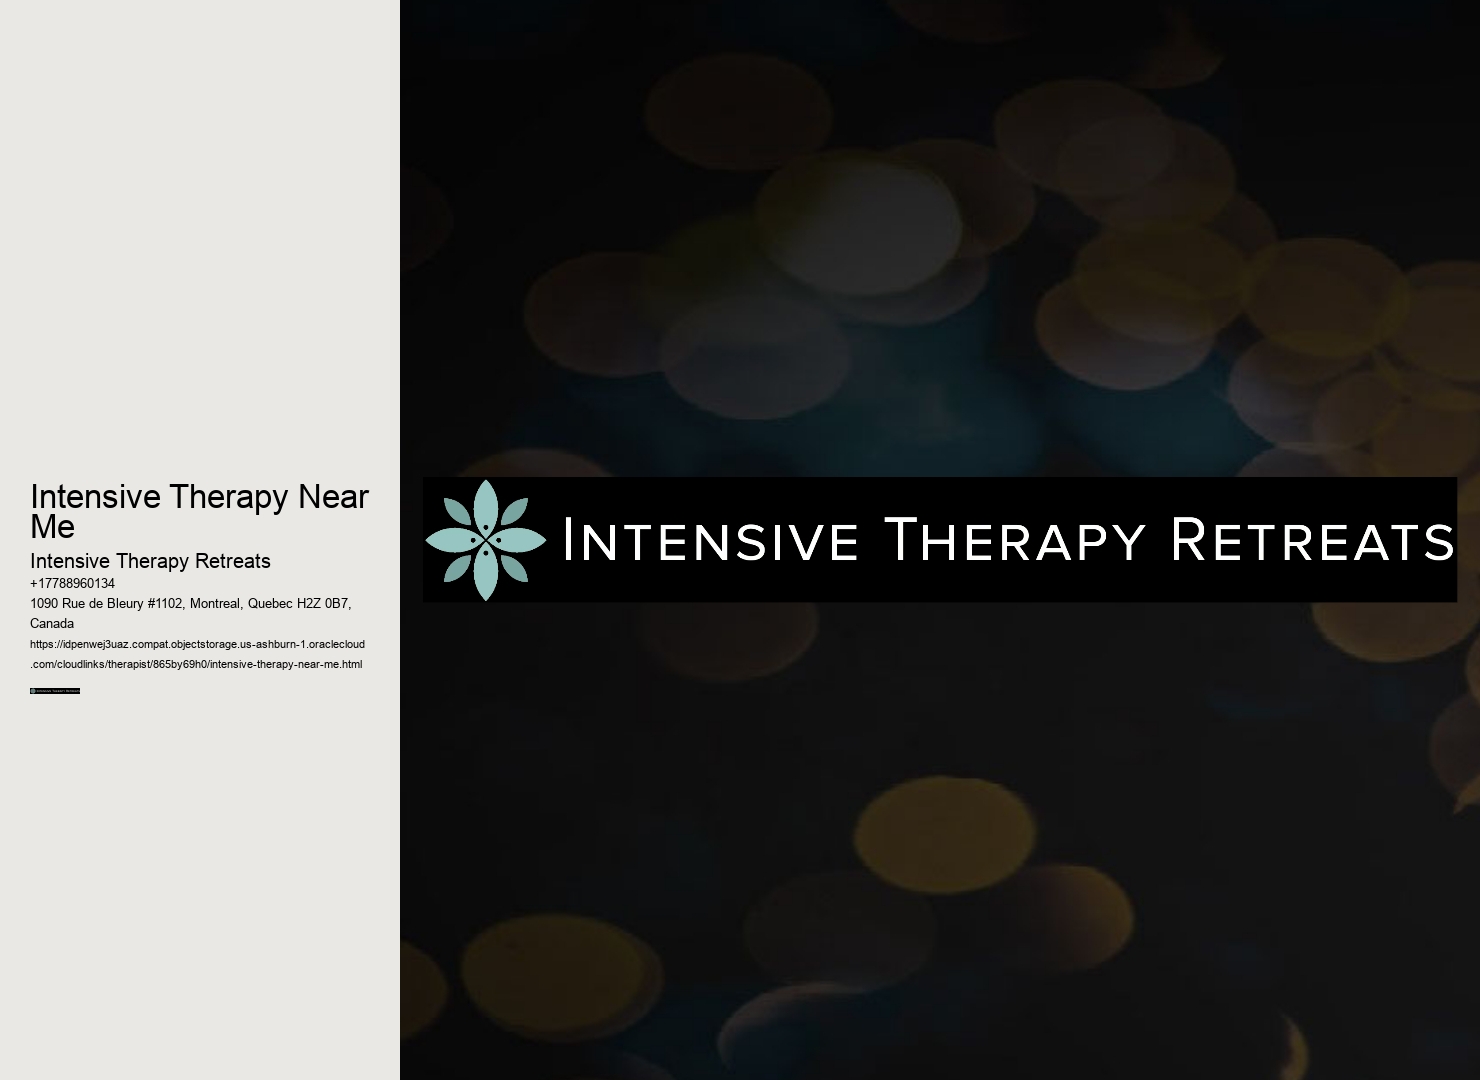 Intensive Therapy Near Me